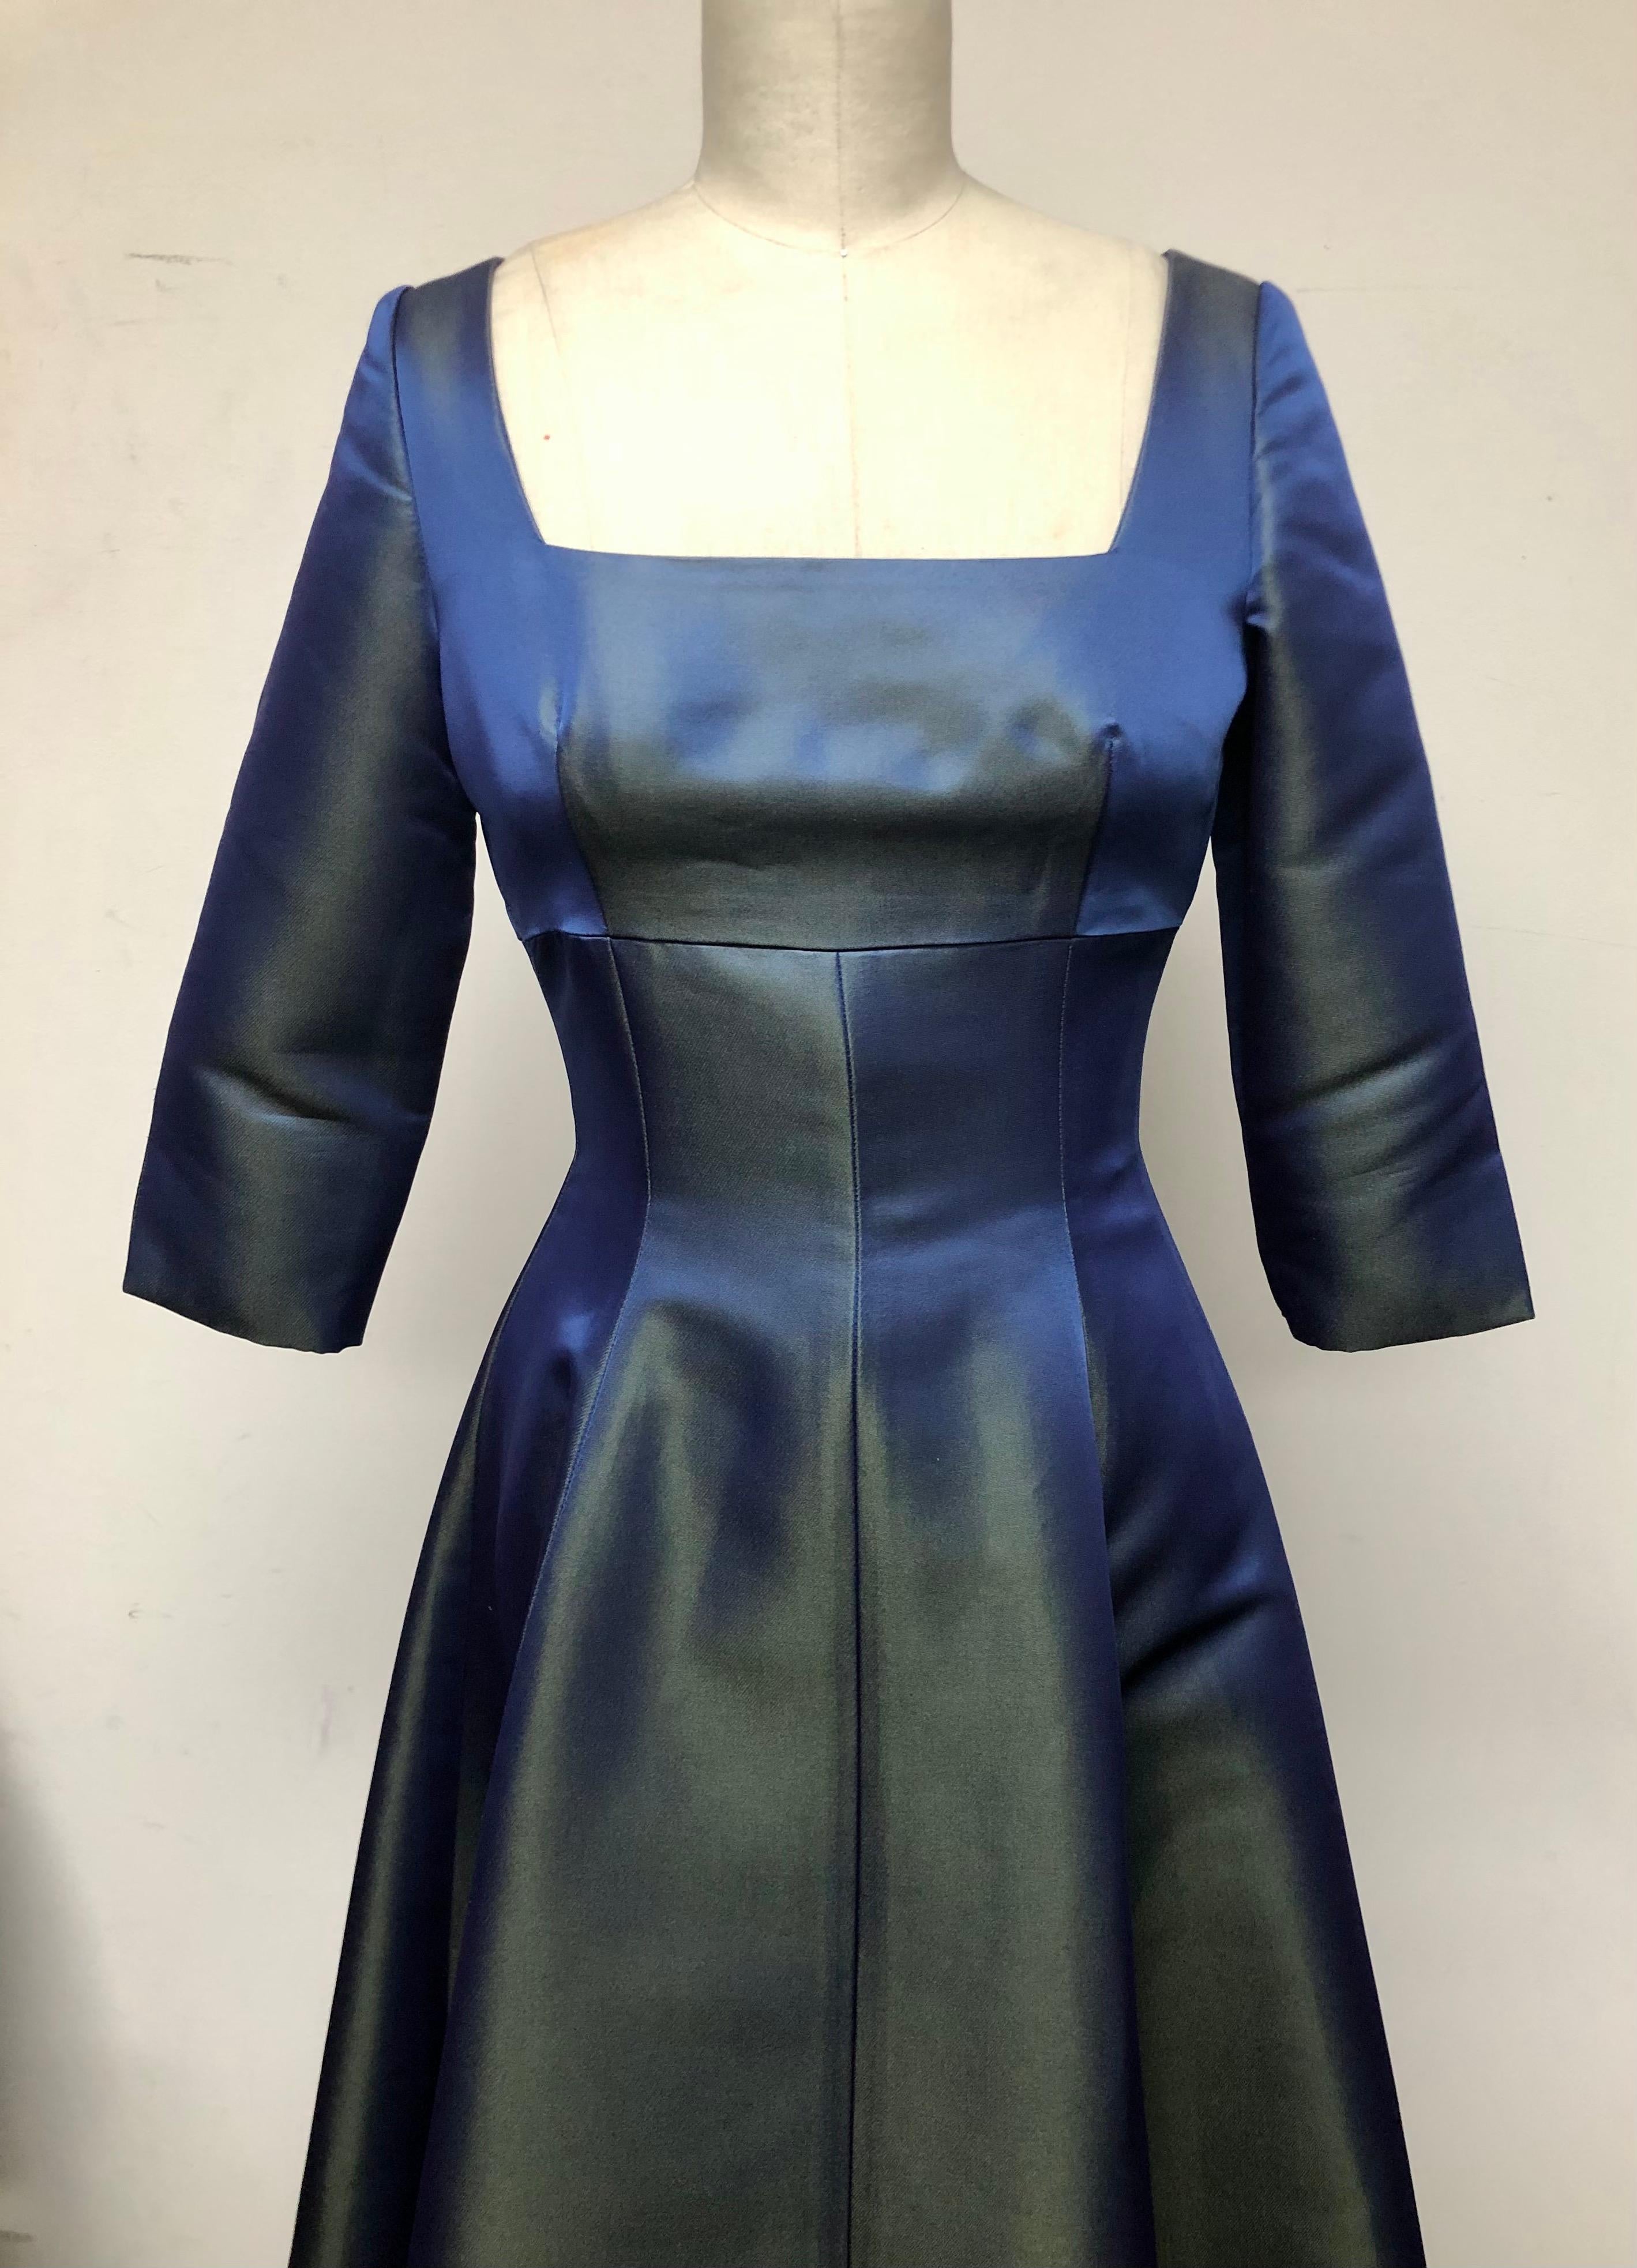 Fit and flair dress with square-neck, 3/4 length sleeve. Originally designed for and worn by Adele. Great for holiday parties and dancing—a true party dress. Iridescent fabric in blue and green heavy satin gives a festive feel. Shown in New York